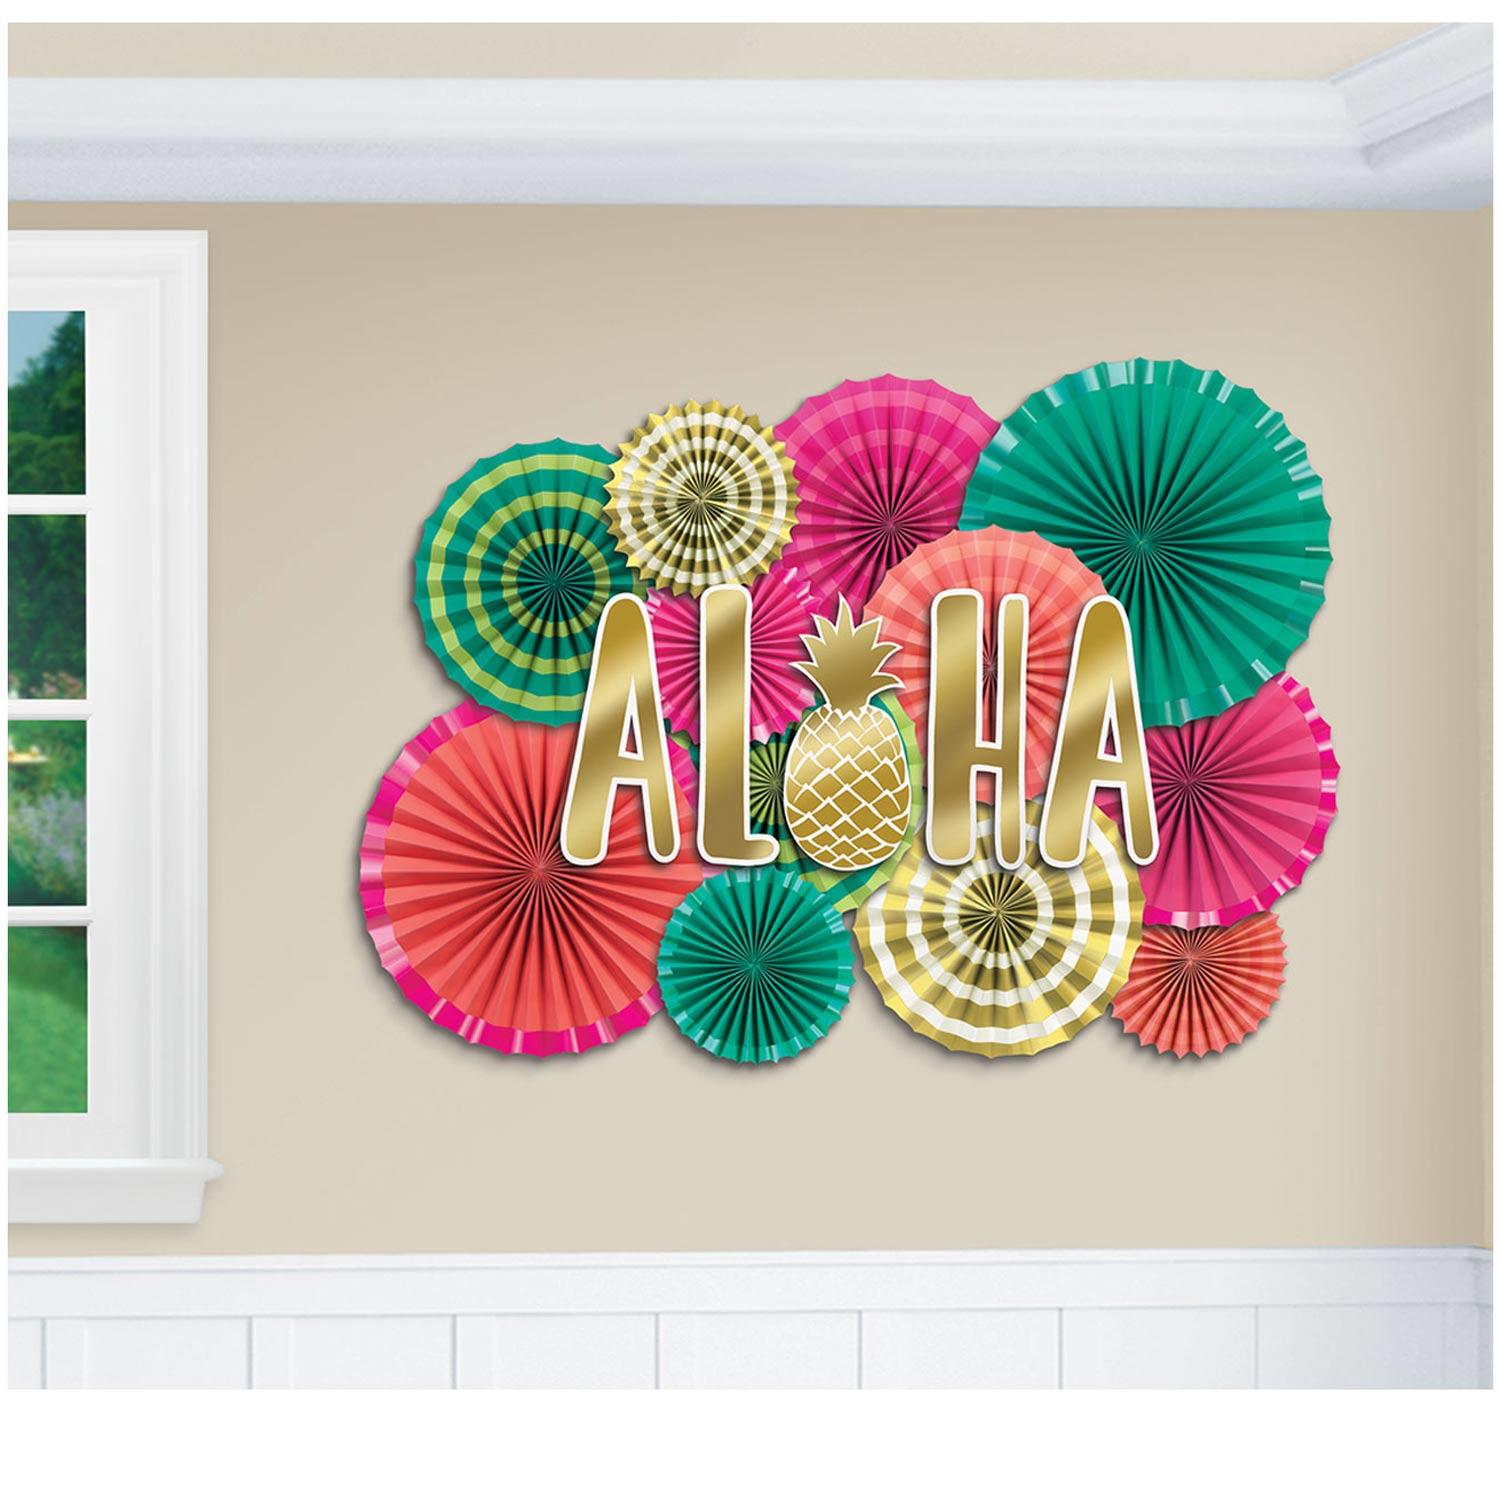 Aloha Summer Decorating Kit - 17pc by Amscan 290092 available here at Karnival Costumes online party shop